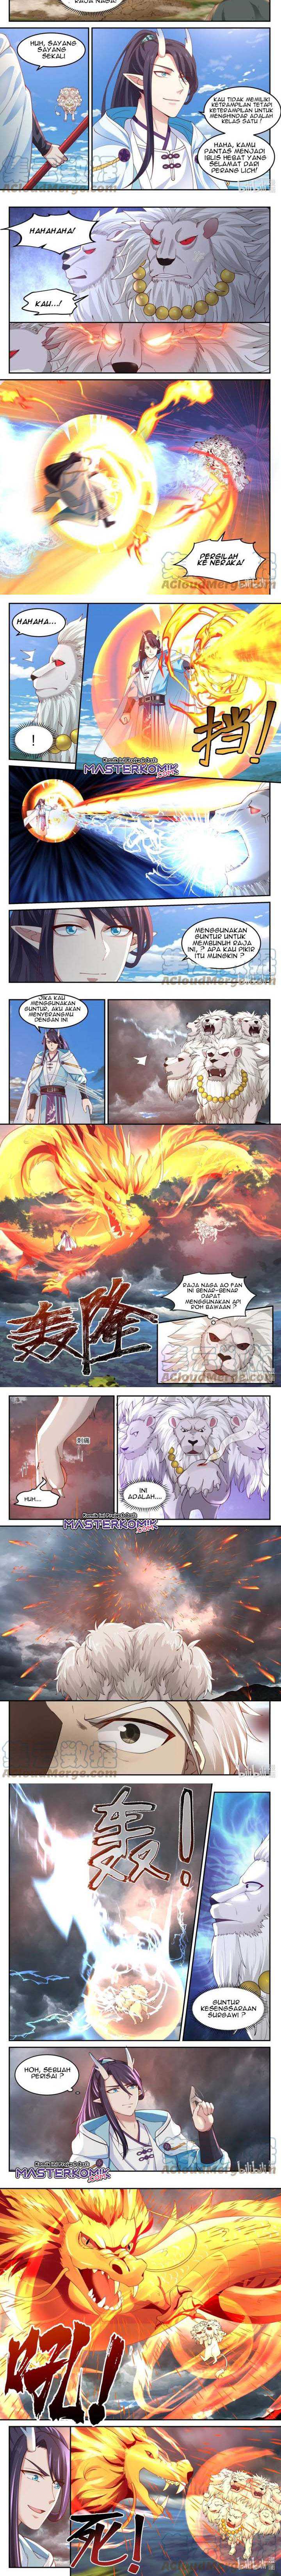 Dragon Throne Chapter 117